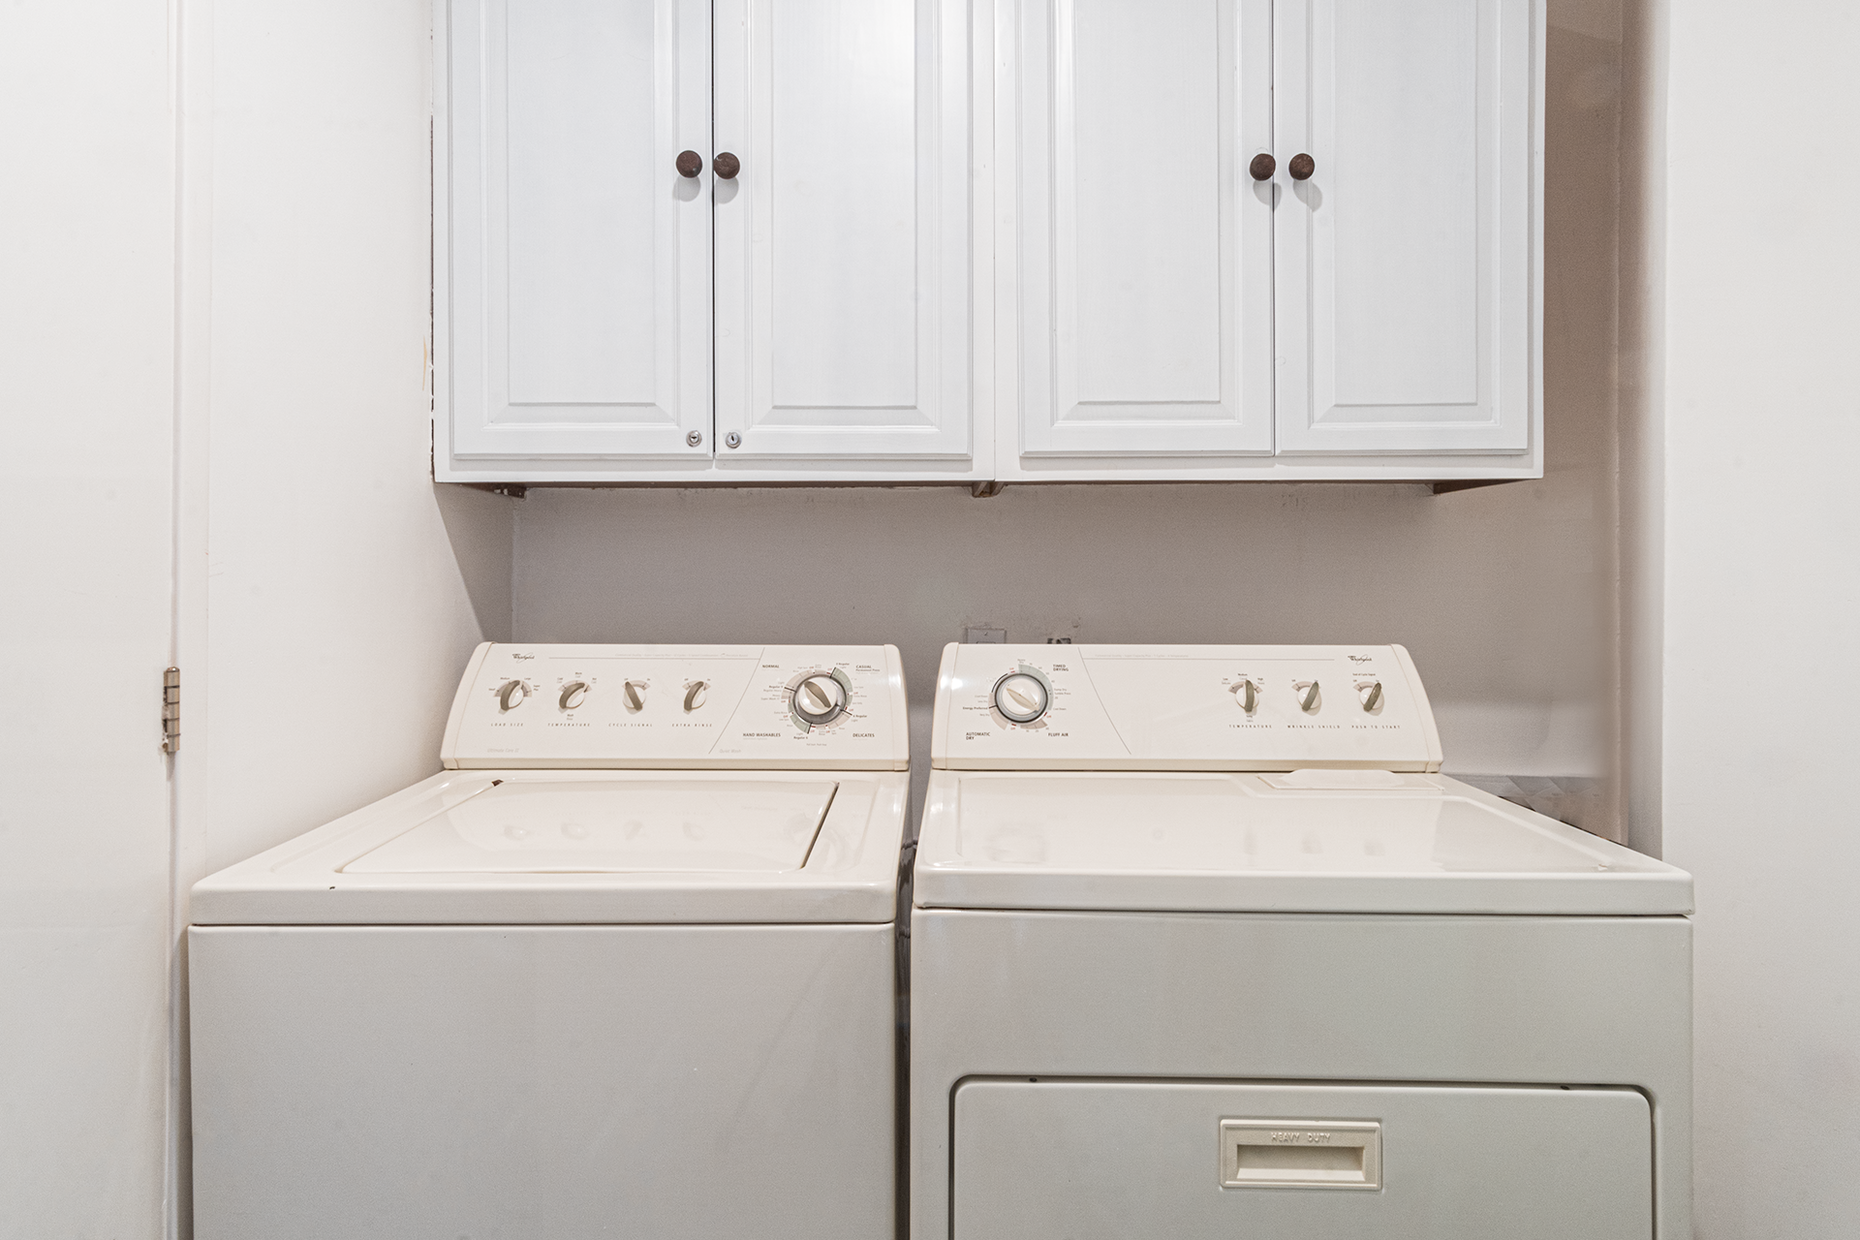 There is a separate utility room as you enter the unit, which has a full sized washer and dryer.